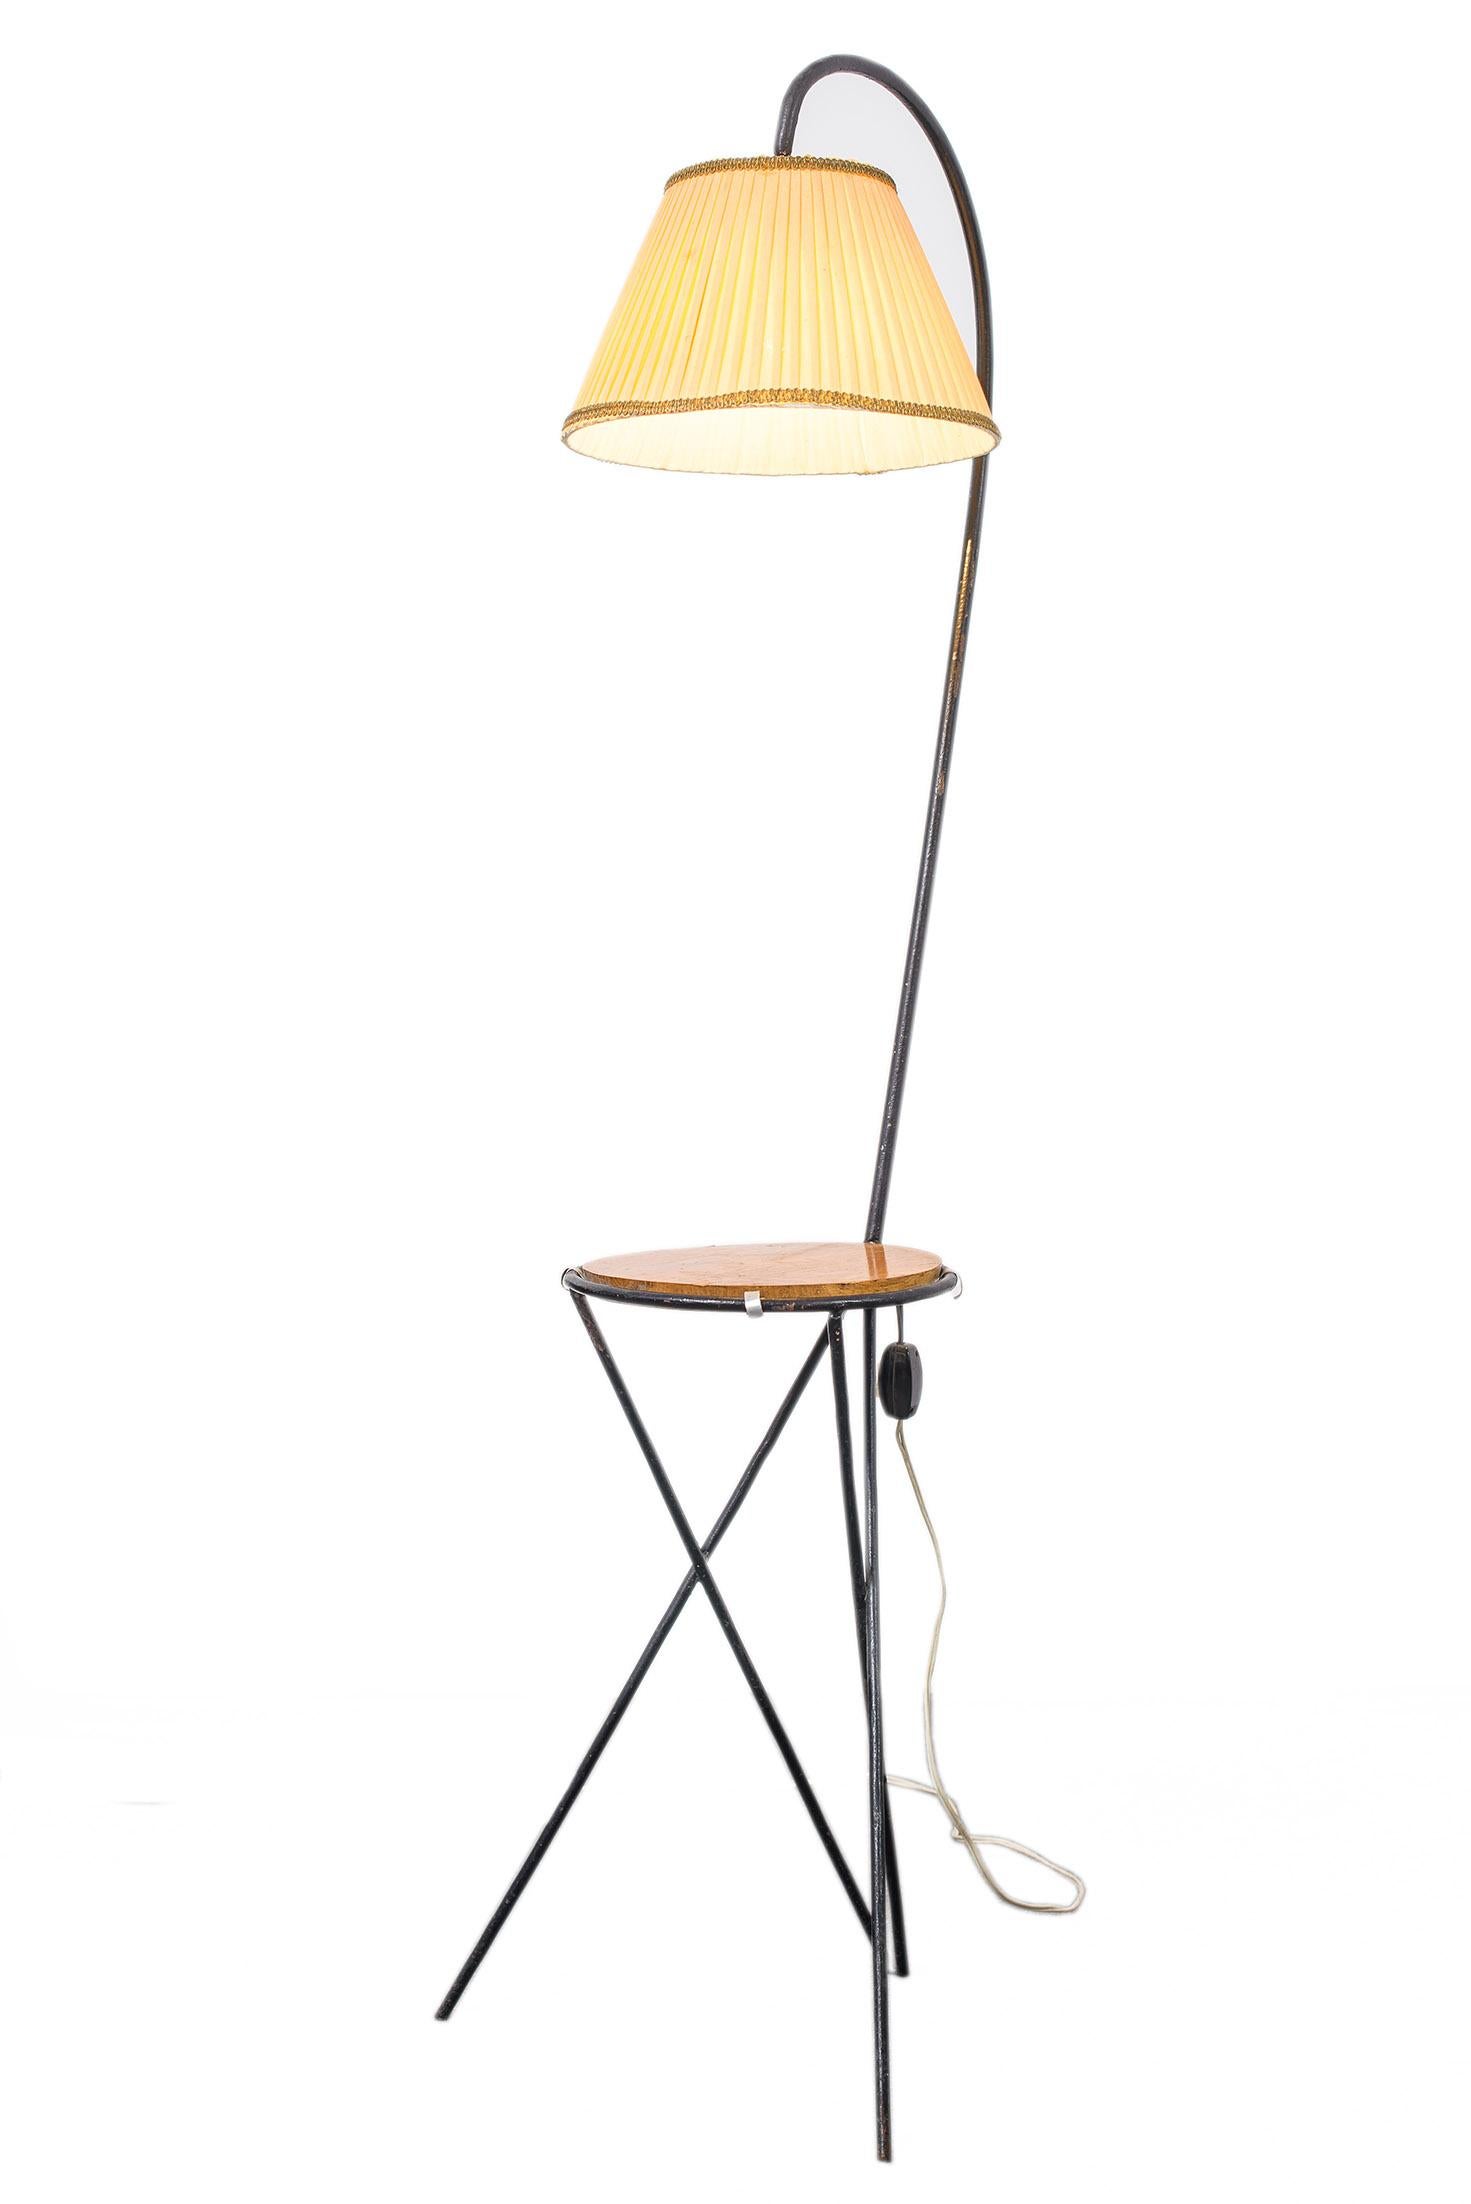 Midcentury floor Lamp from Hungary.
Midcentury metal and wood, fabric floor Lamp, circa 1950.

Size :30 cm lampshade Q
metal +lampshade:89 cm 
underfoot:40x40
 